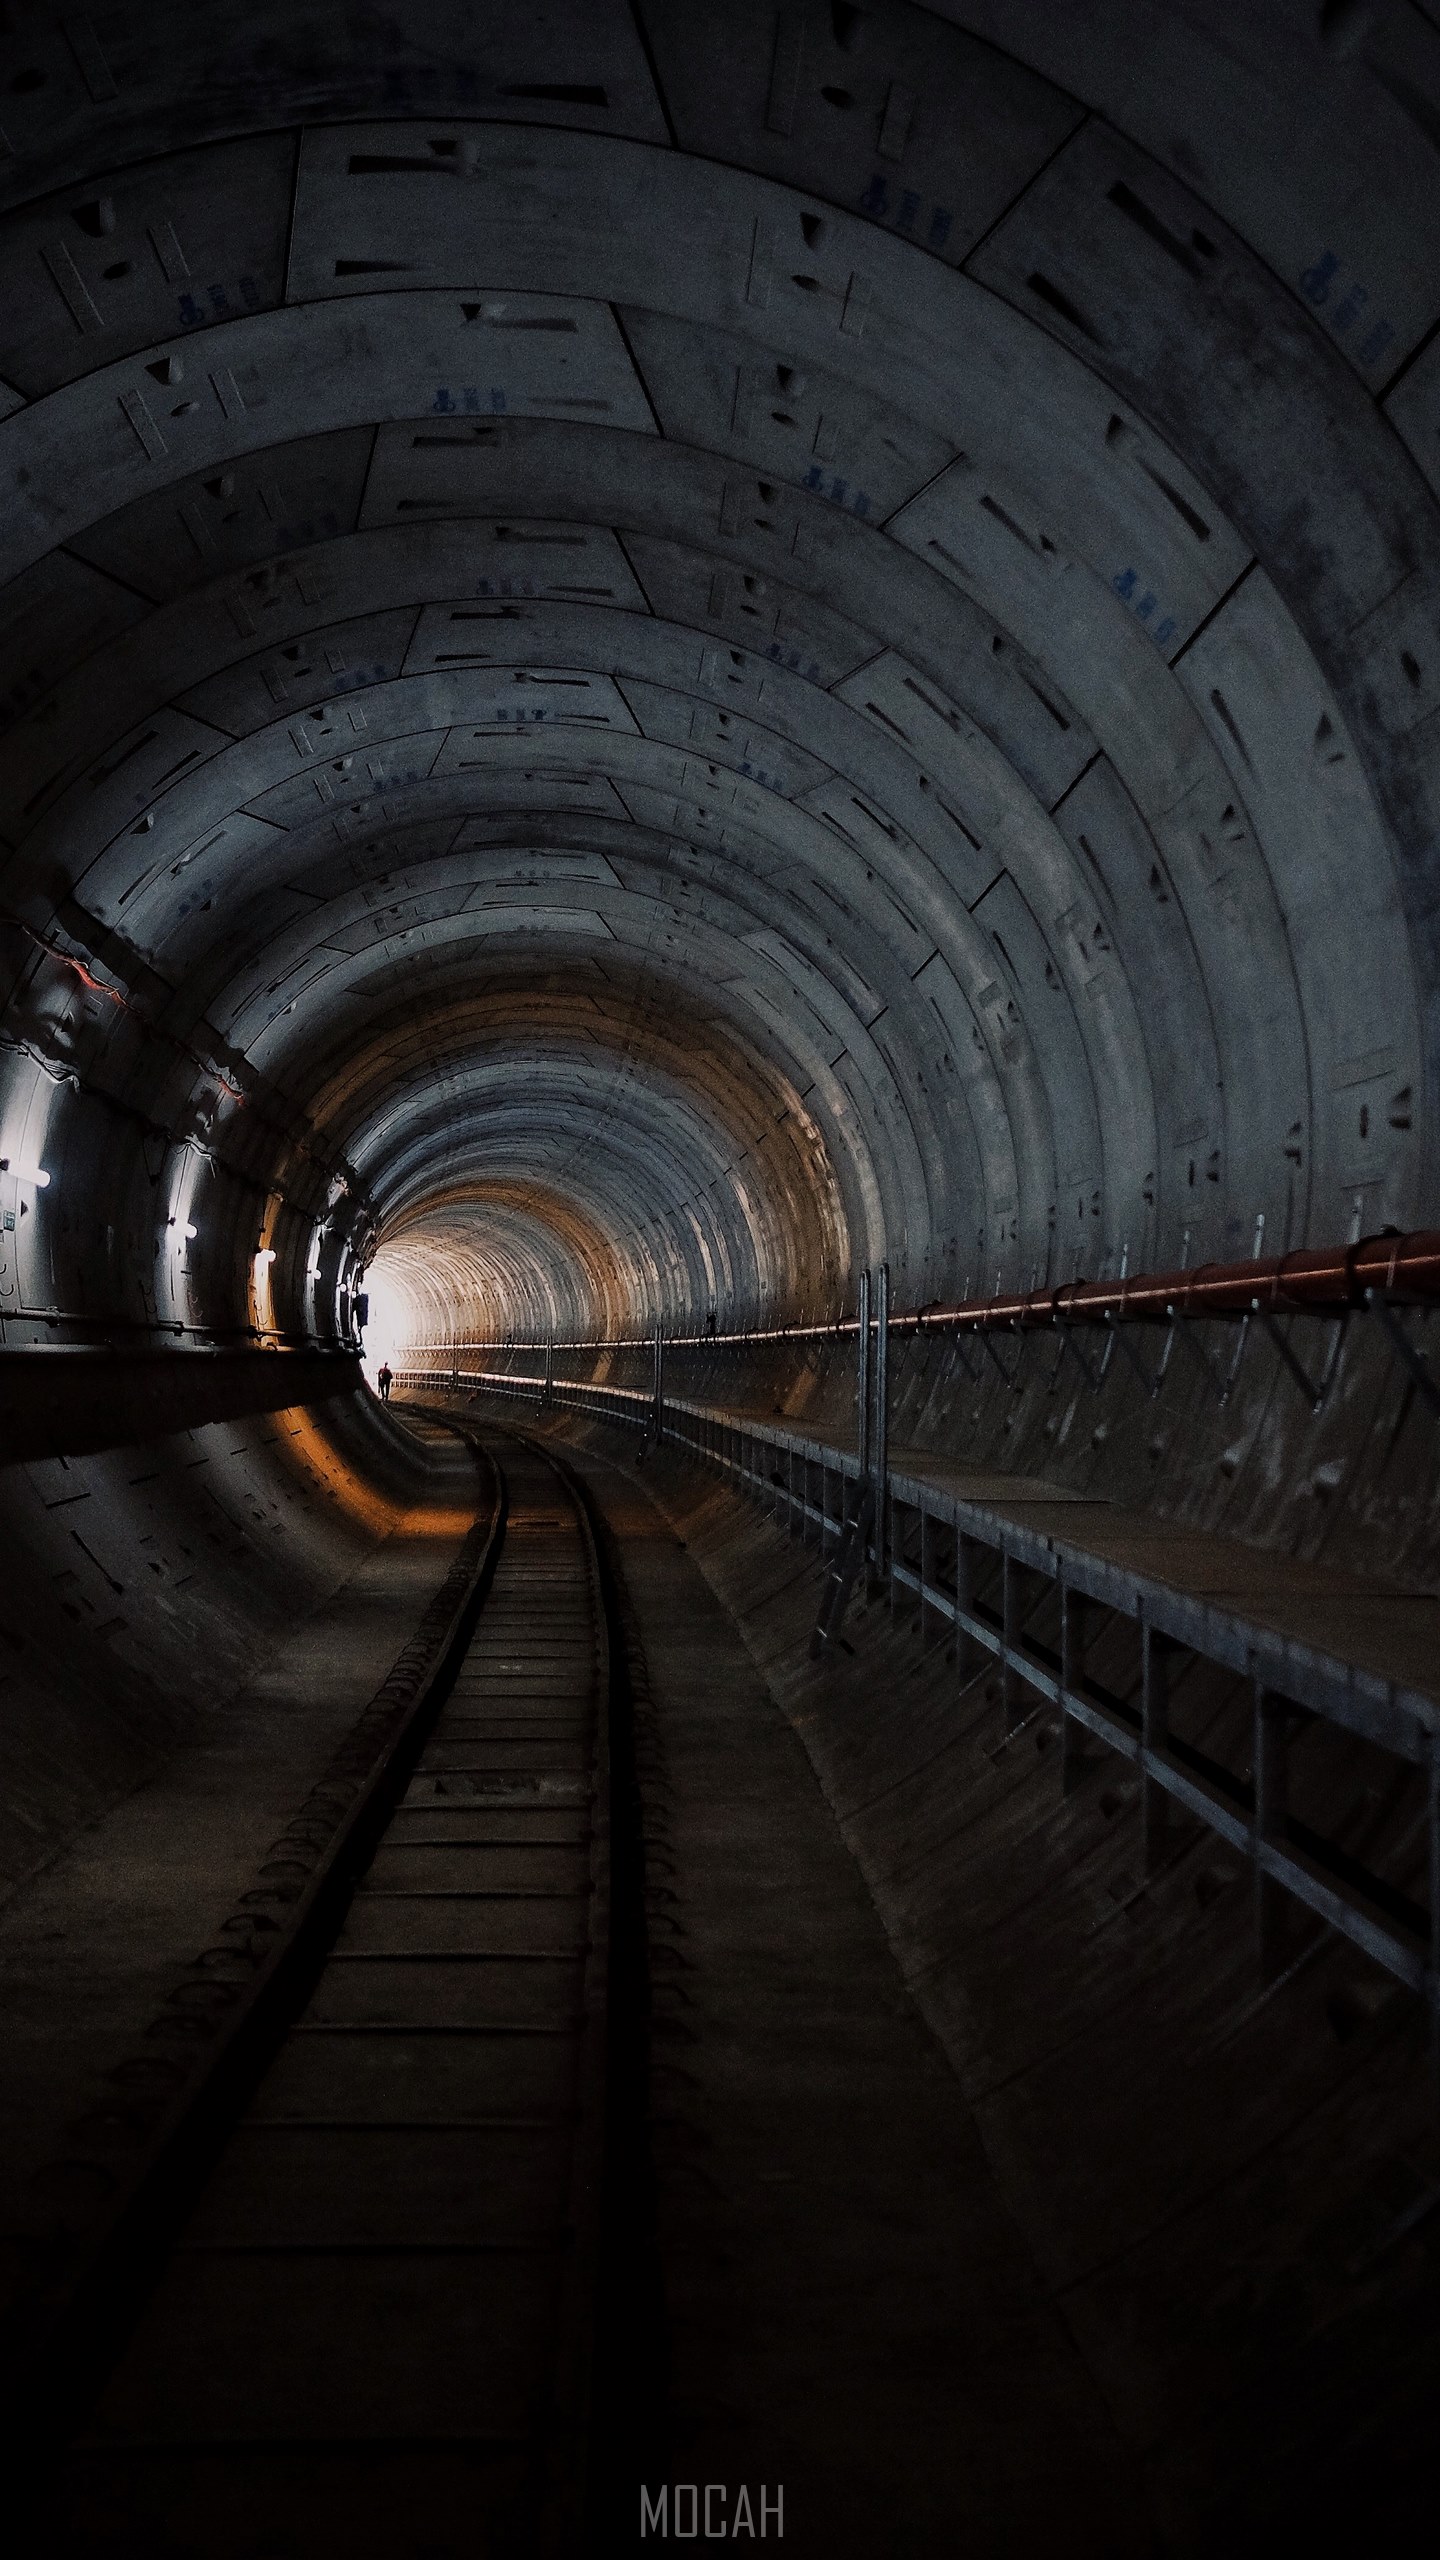 tunnel curve bend and track hd, Nokia 9 wallpaper HD free download, 1440x2560. Mocah HD Wallpaper